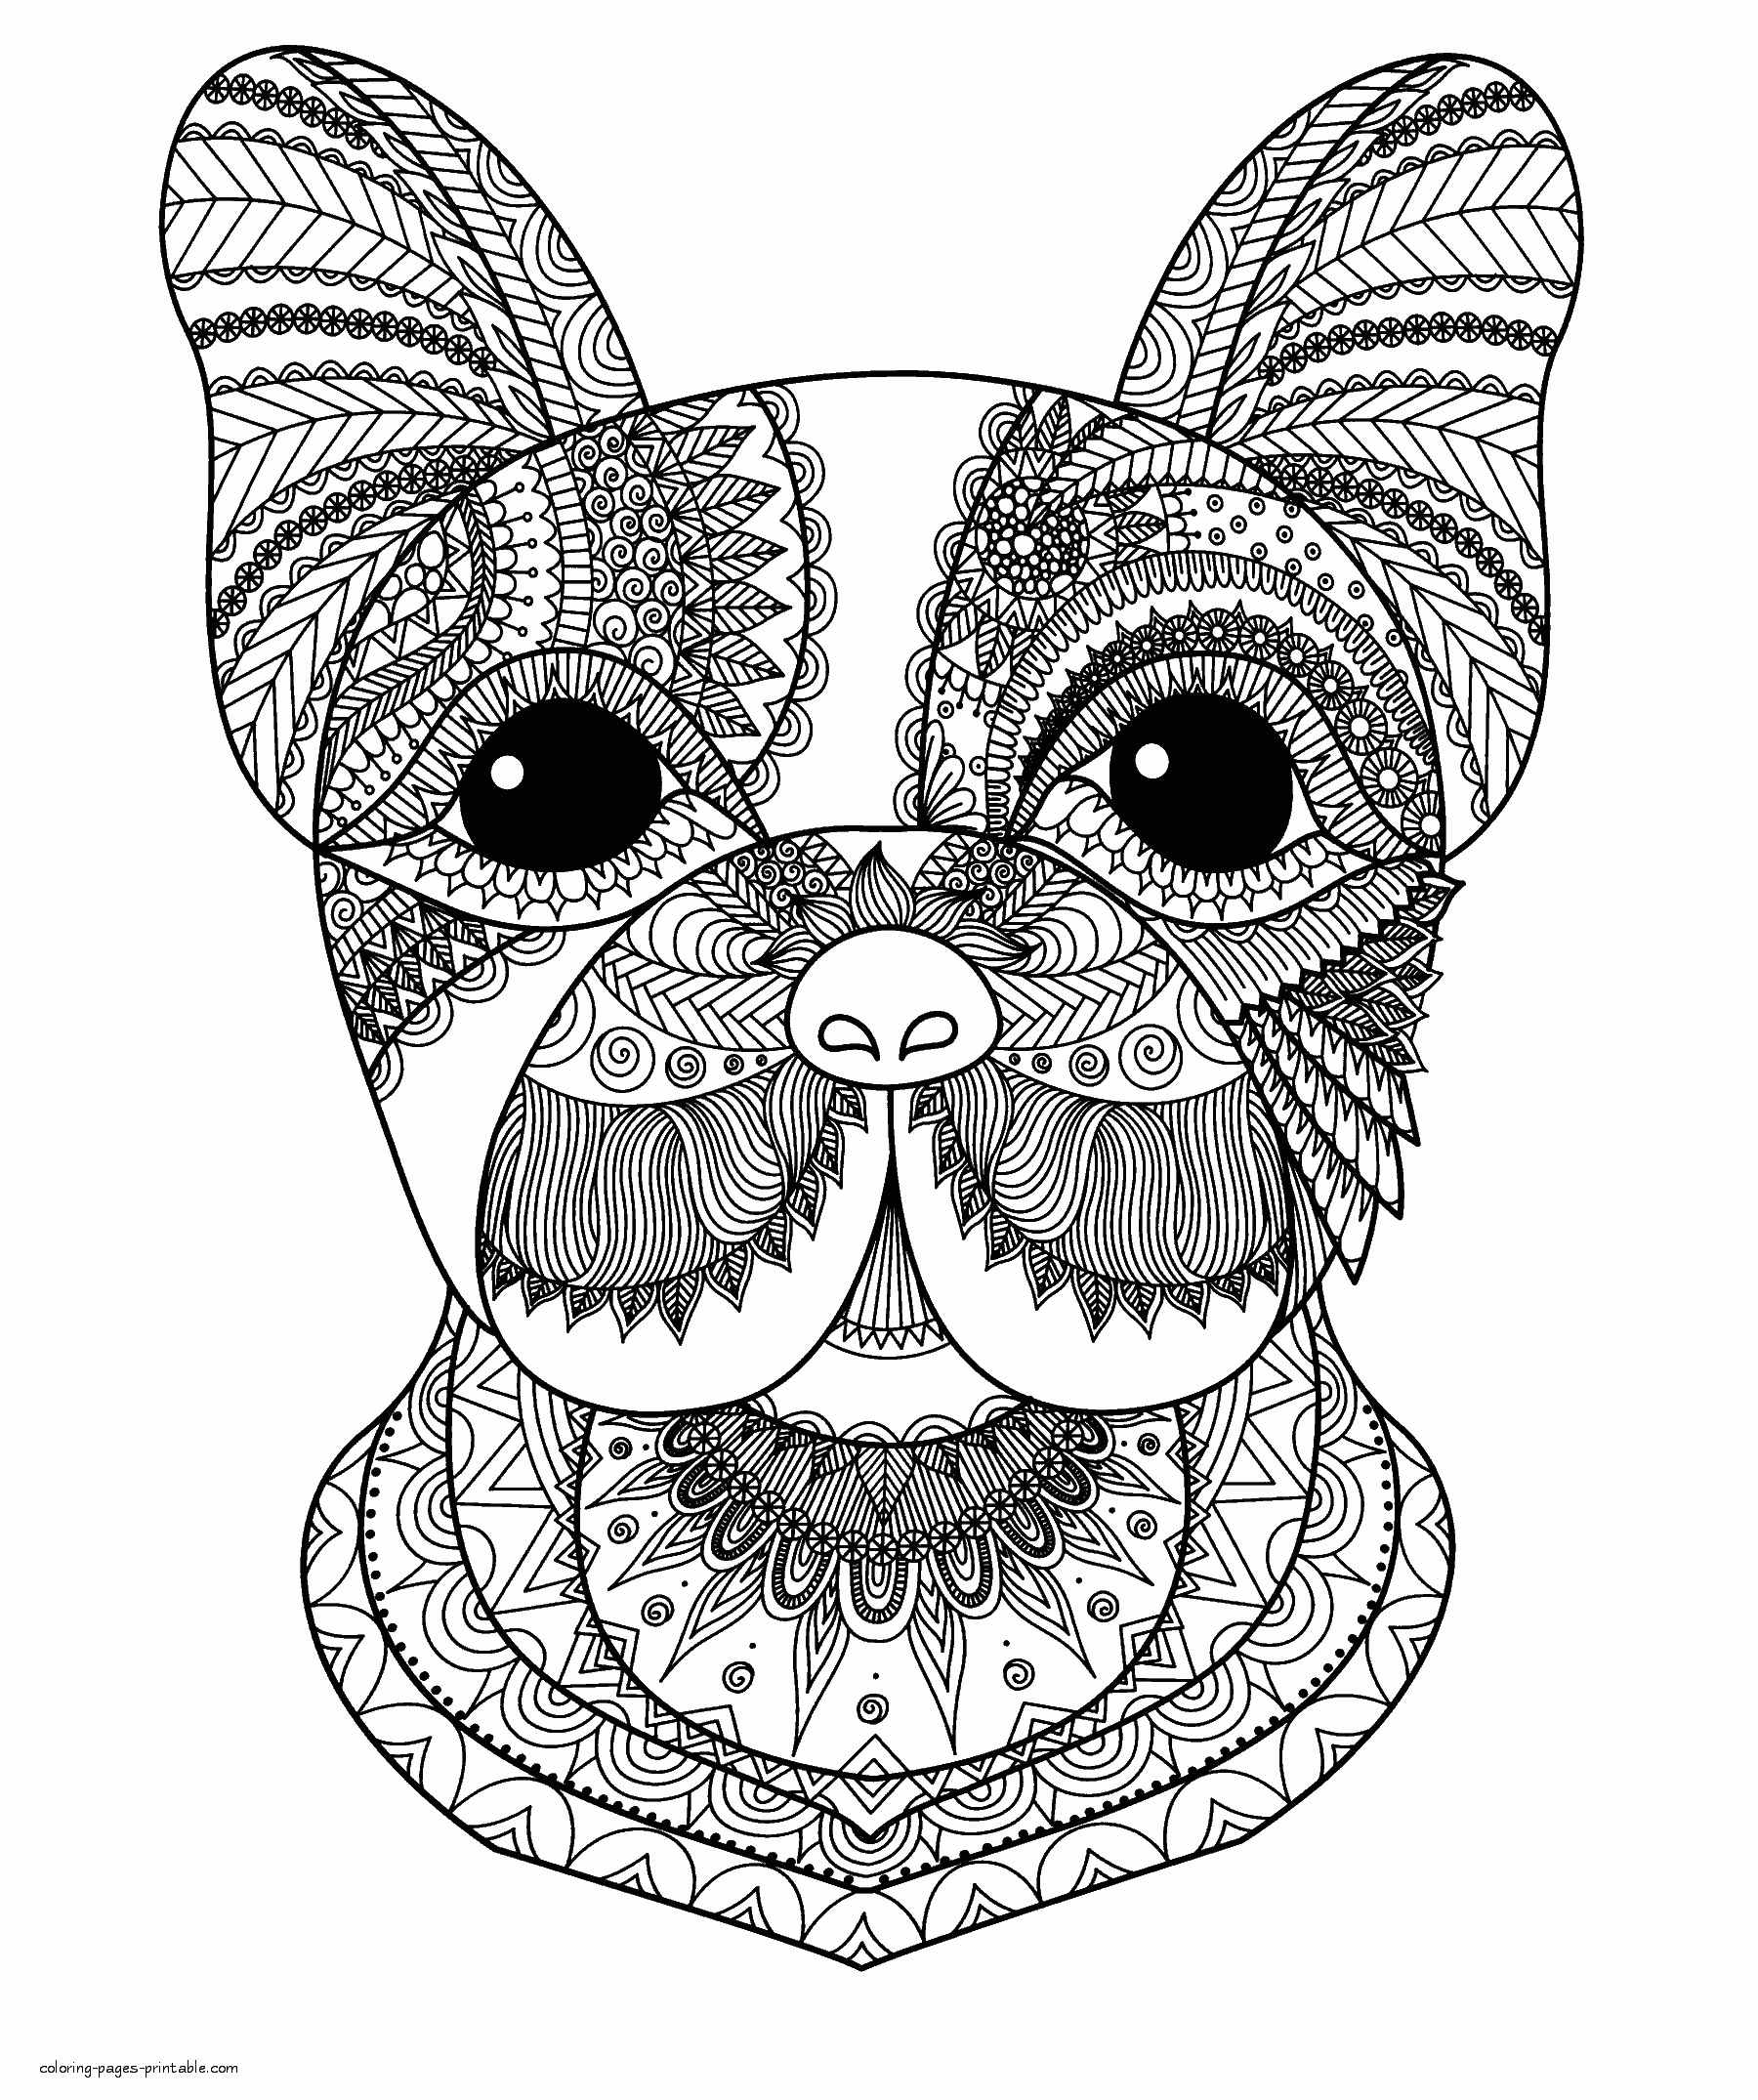 Intricate Animal Coloring Pages    COLORING PAGES PRINTABLE.COM